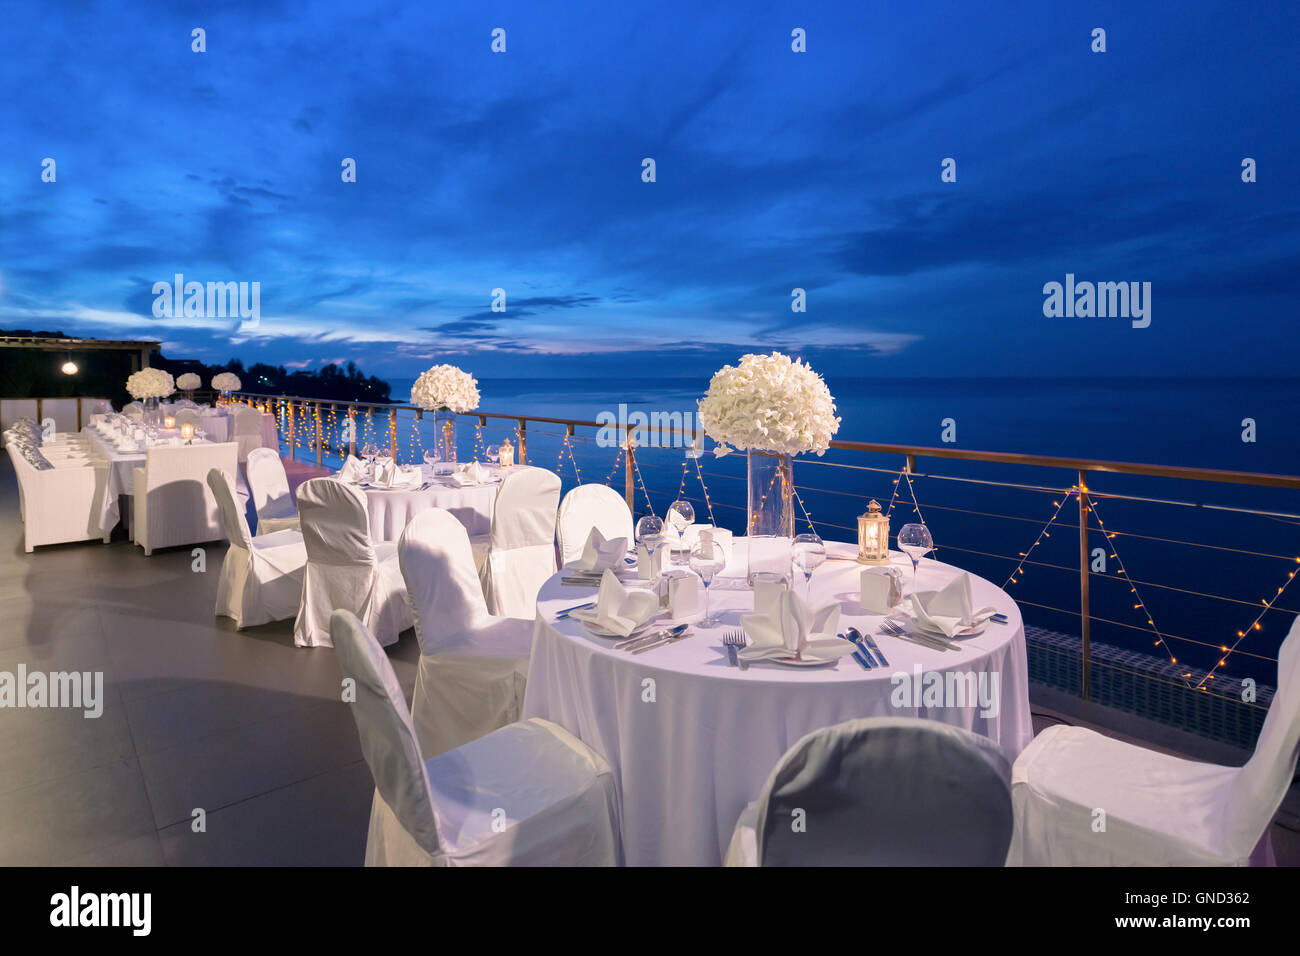  Romantic  dinner  setup decoration  with candle light  